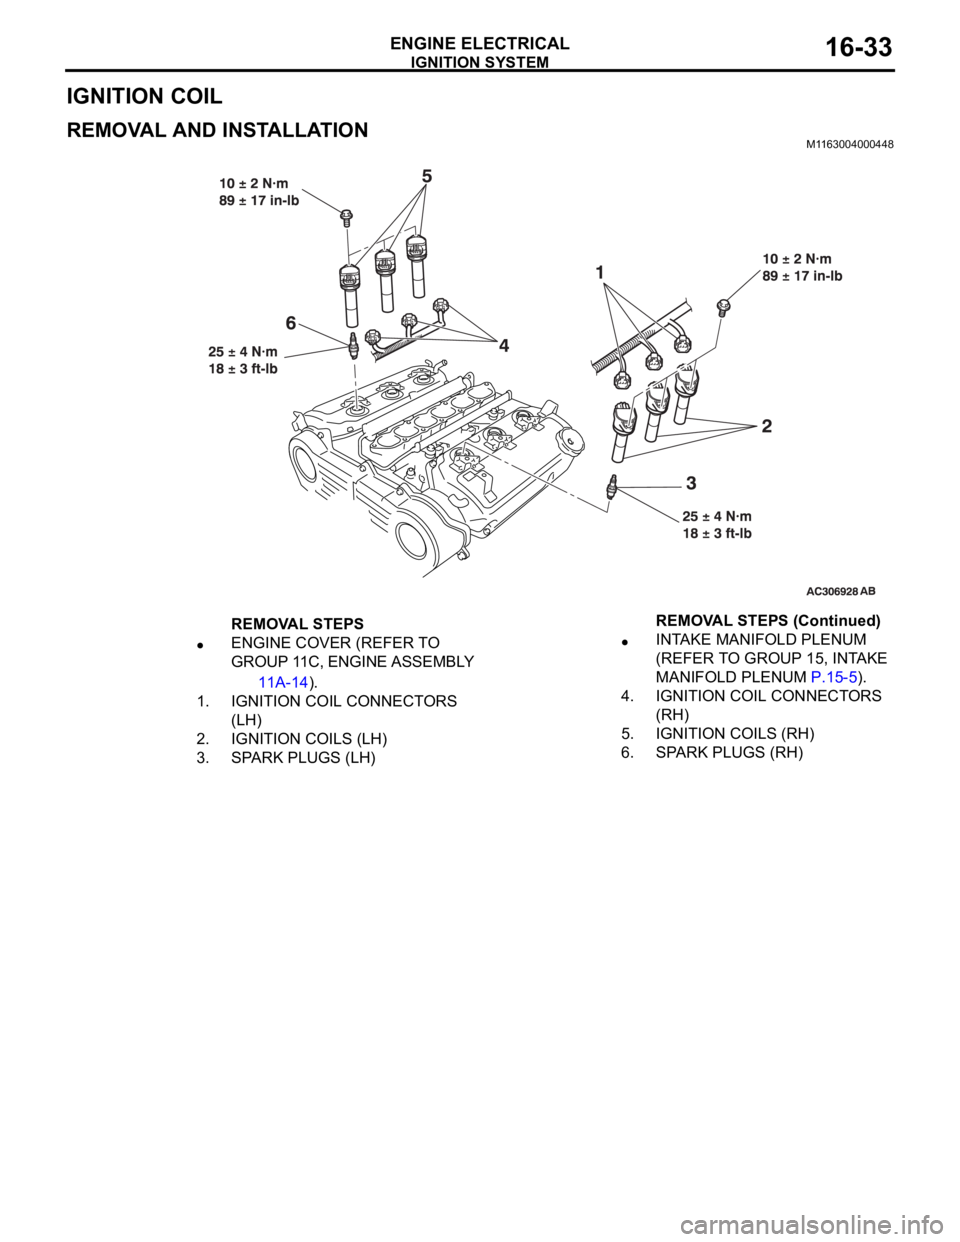 MITSUBISHI 380 2005  Workshop Manual IGNITION SYSTEM
ENGINE ELECTRICAL16-33
IGNITION COIL
REMOVAL AND INSTALLATION M1163004000448
REMOVAL STEPS
ENGINE COVER (REFER TO 
GROUP 11C, ENGINE ASSEMBLY 
11A-14).
1. IGNITION COIL CONNECTORS 
(LH